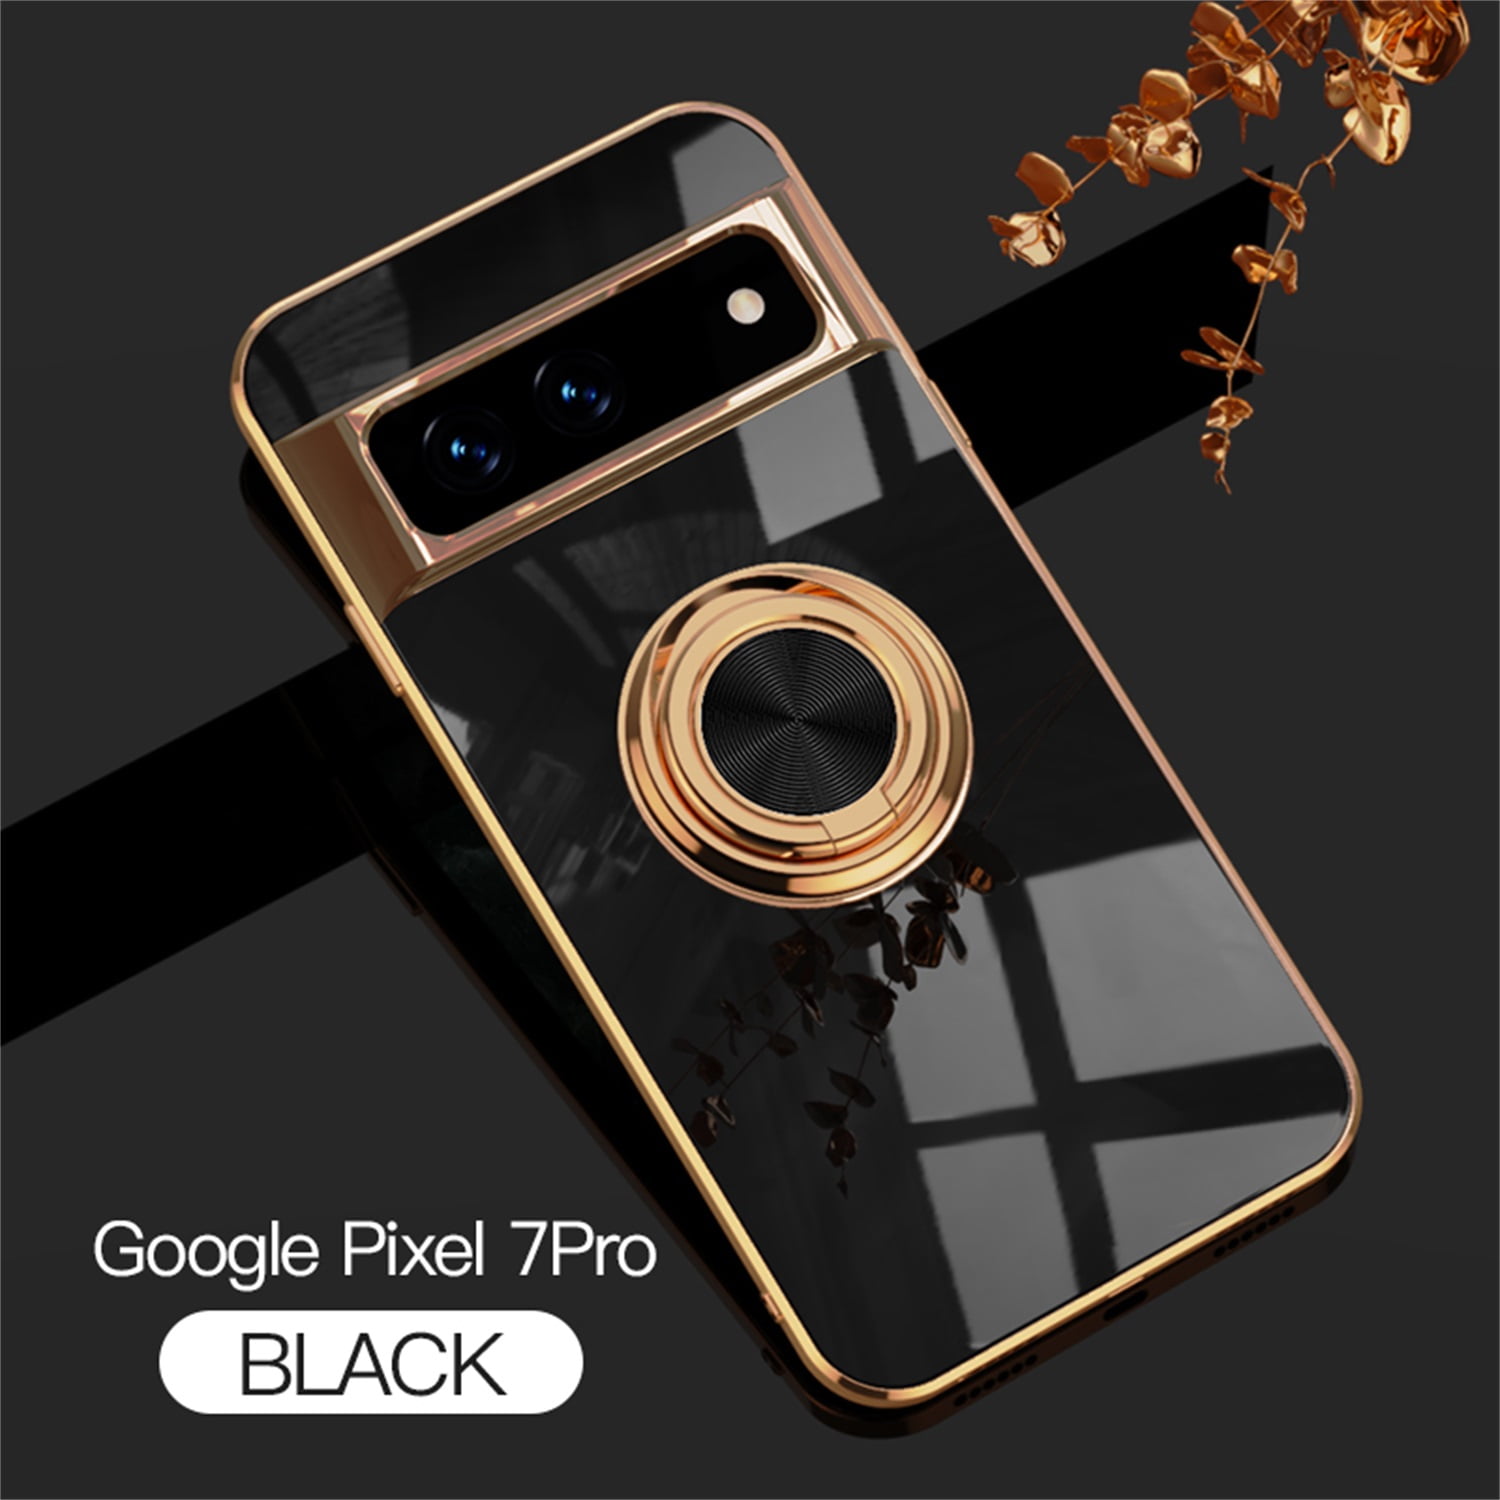 Luxury Brand Case For Google PIXEL 7 PRO With Finger Ring Holder Square  Leather Soft PU